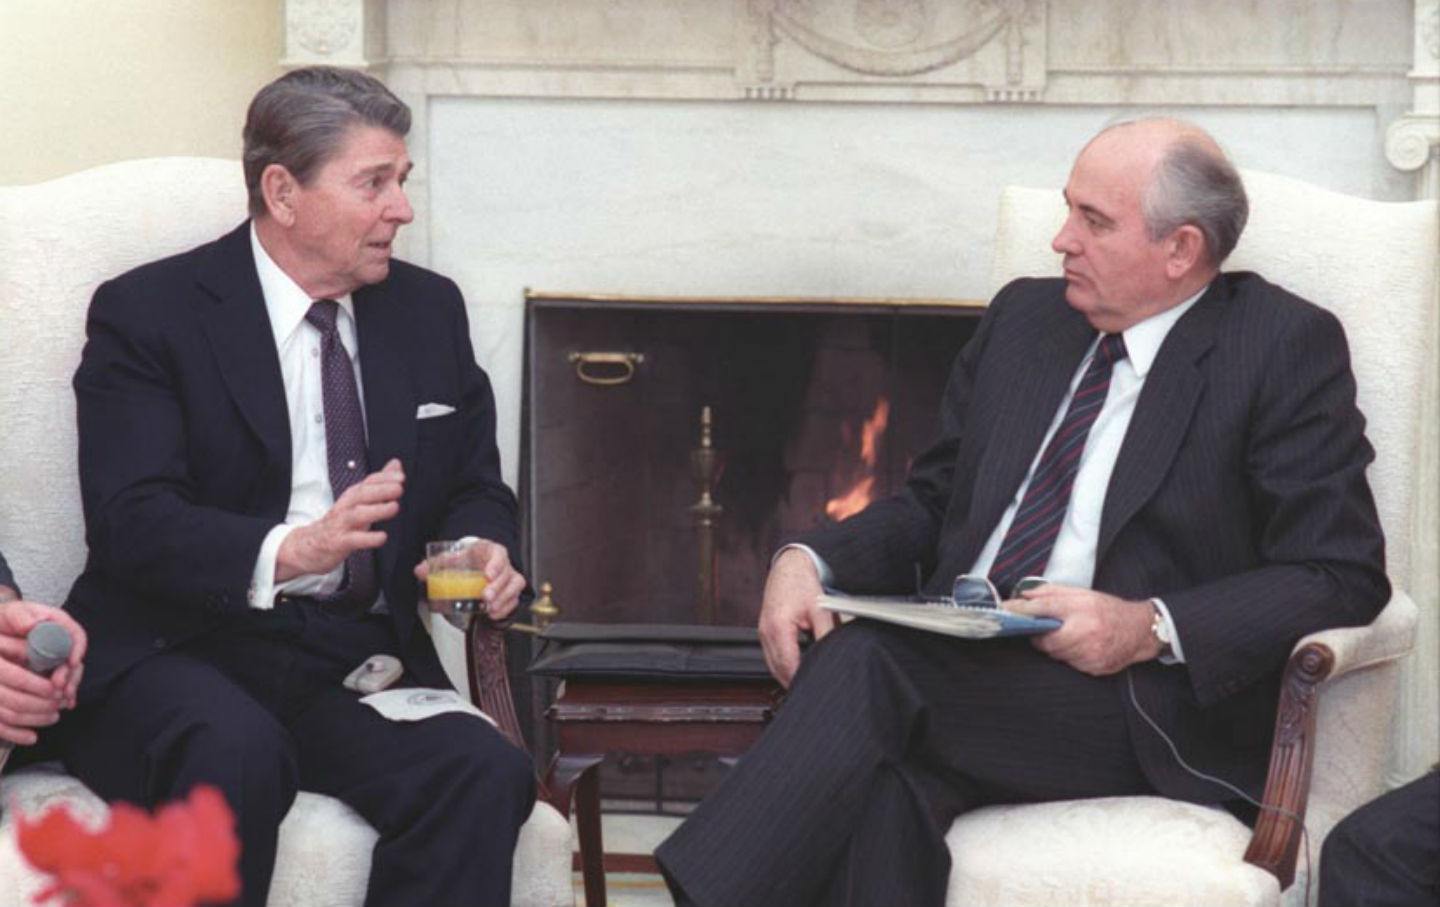 October 11, 1986: Ronald Reagan and Mikhail Gorbachev Meet in Reykjavik, Iceland, to Negotiate Disarmament